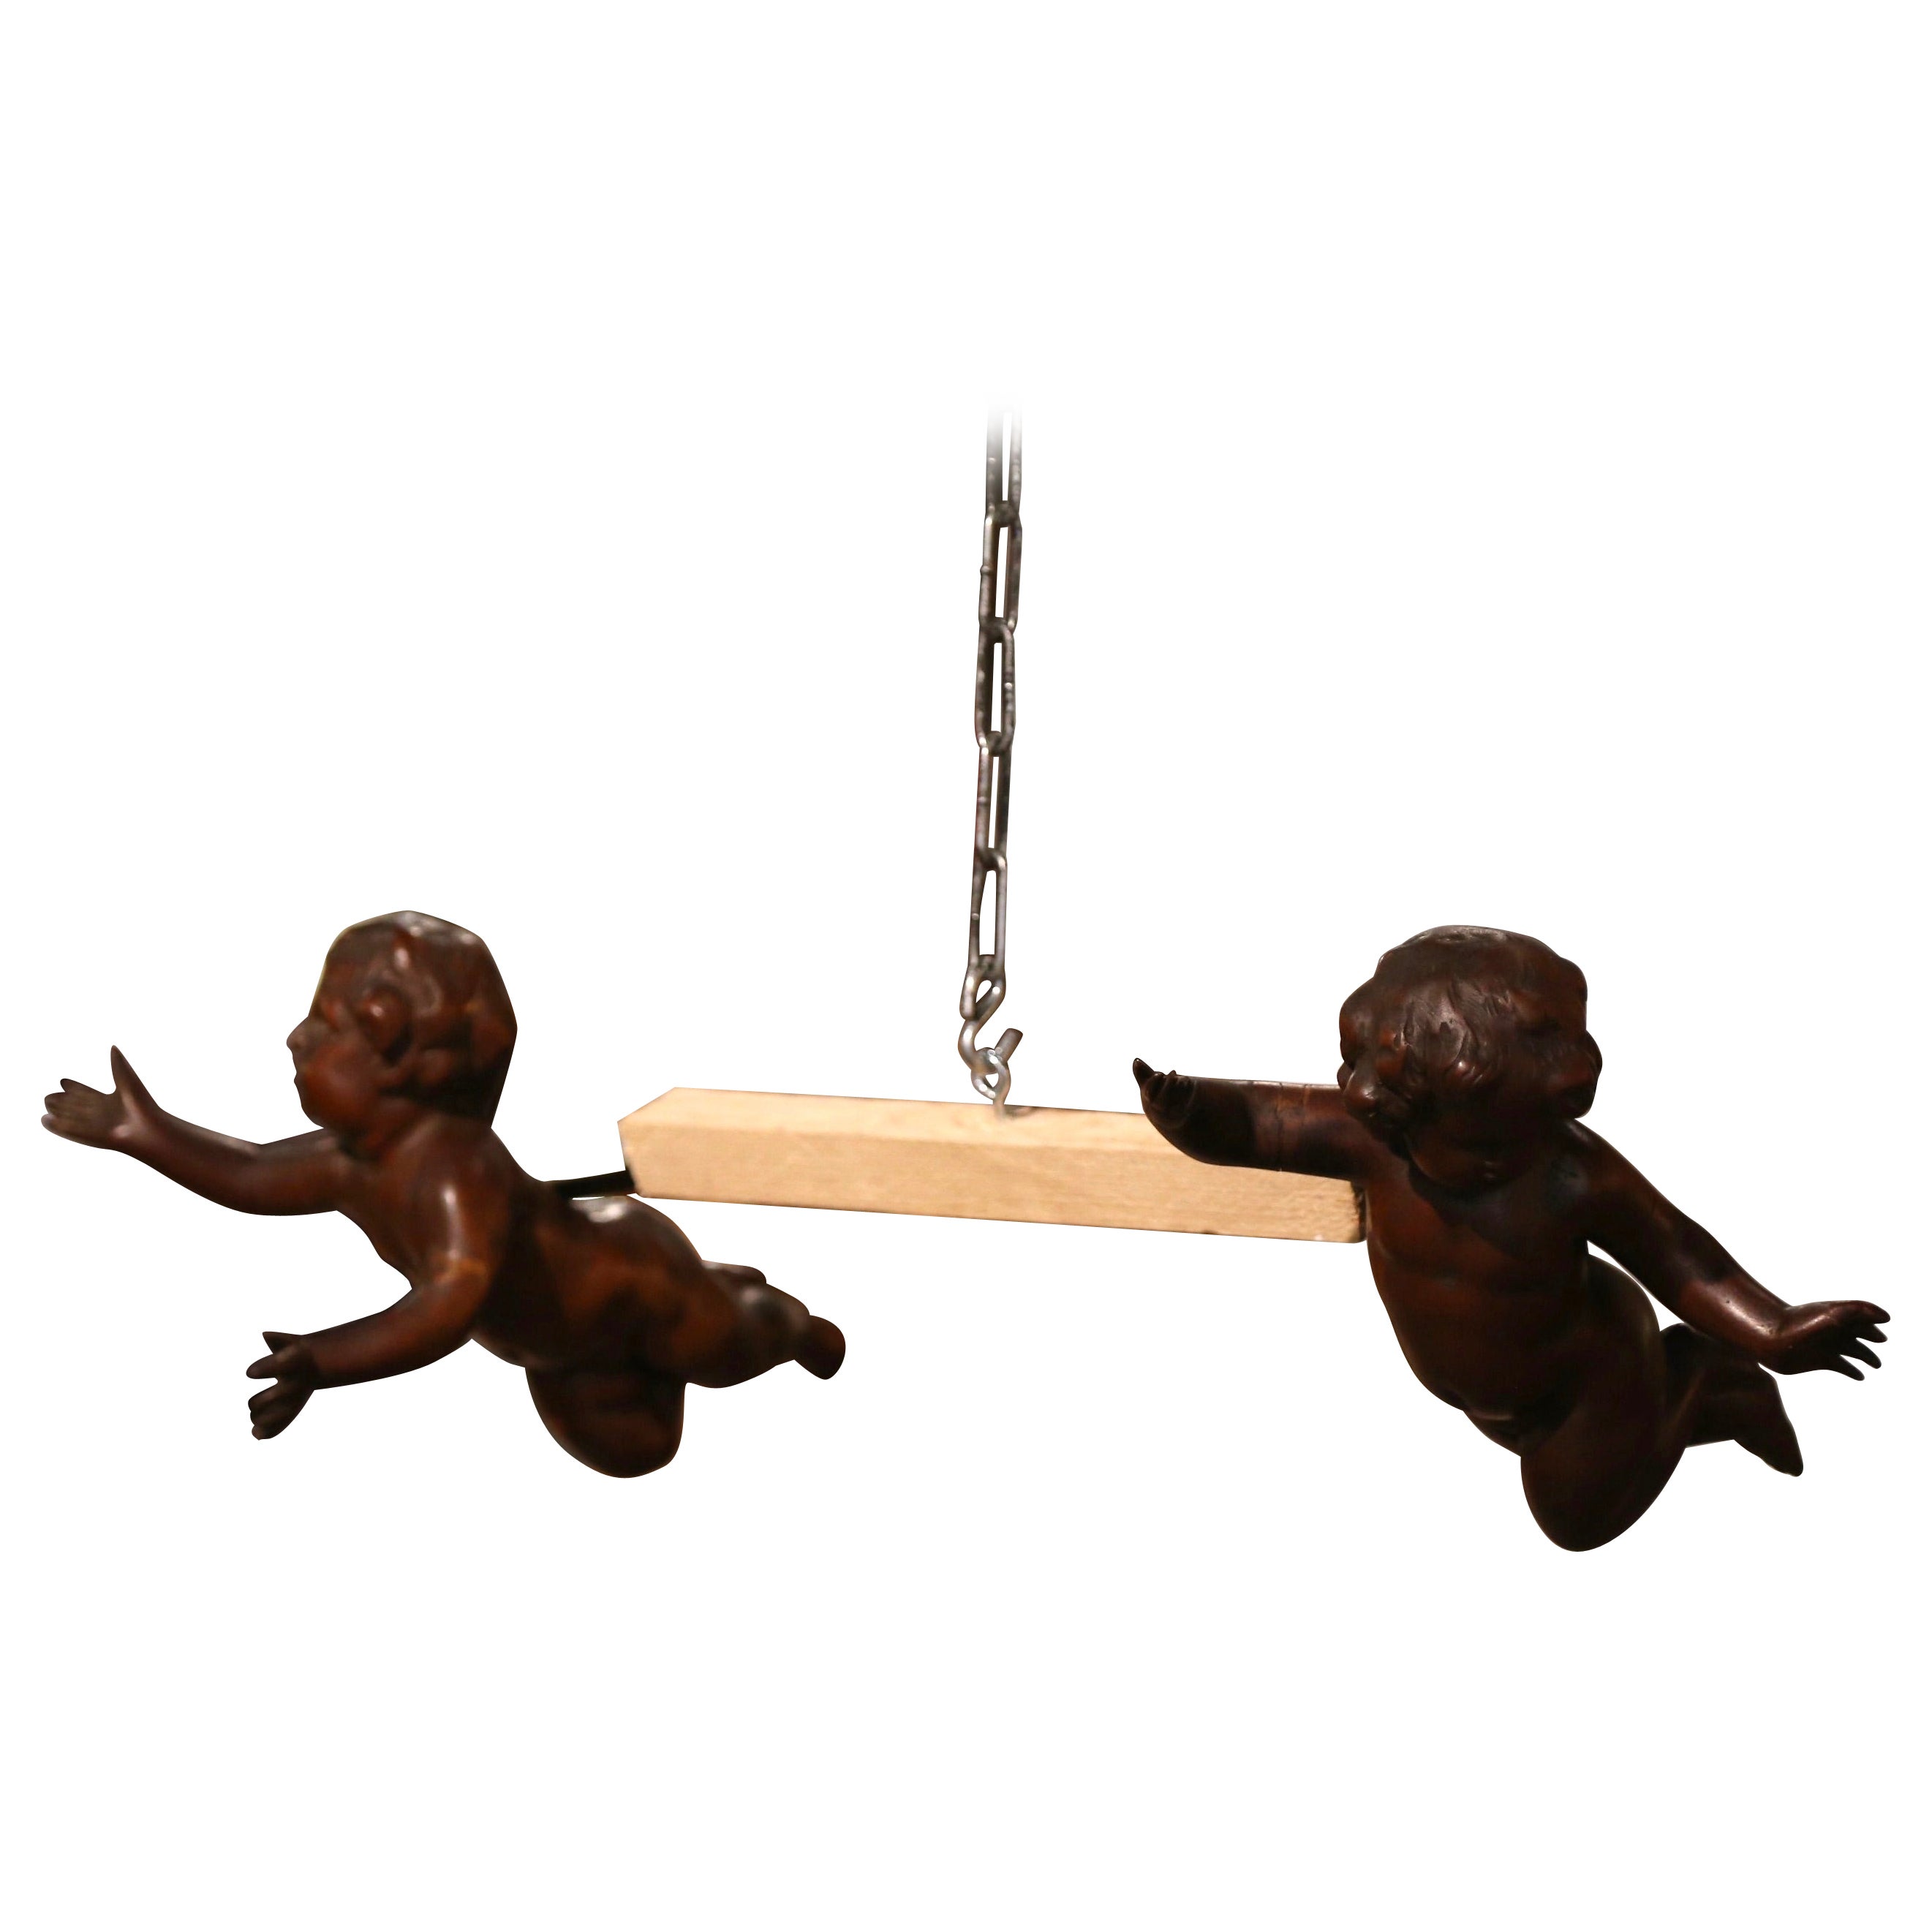 Pair of 19th Century Italian Carved Walnut Cherub Wall Sculptures For Sale